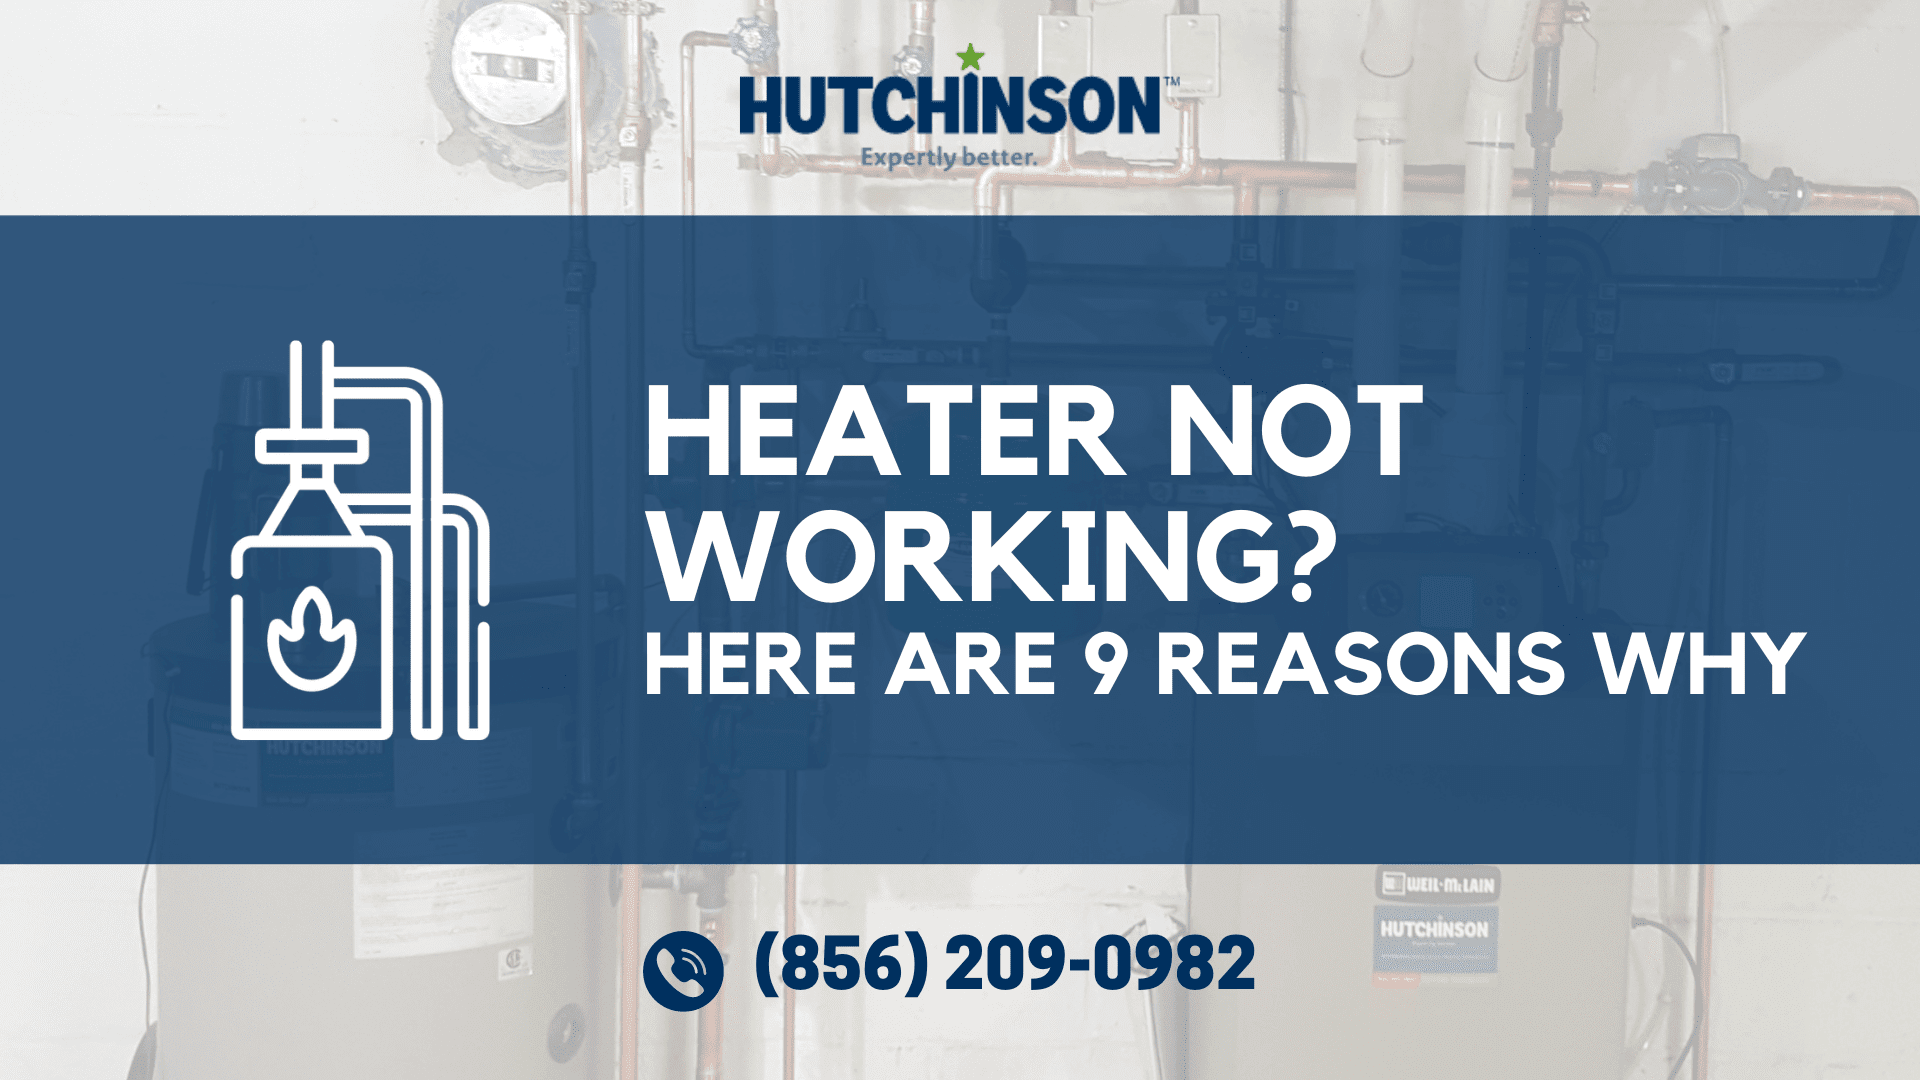 Heater Not Working? Here are 9 Reasons Why and How to Fix it